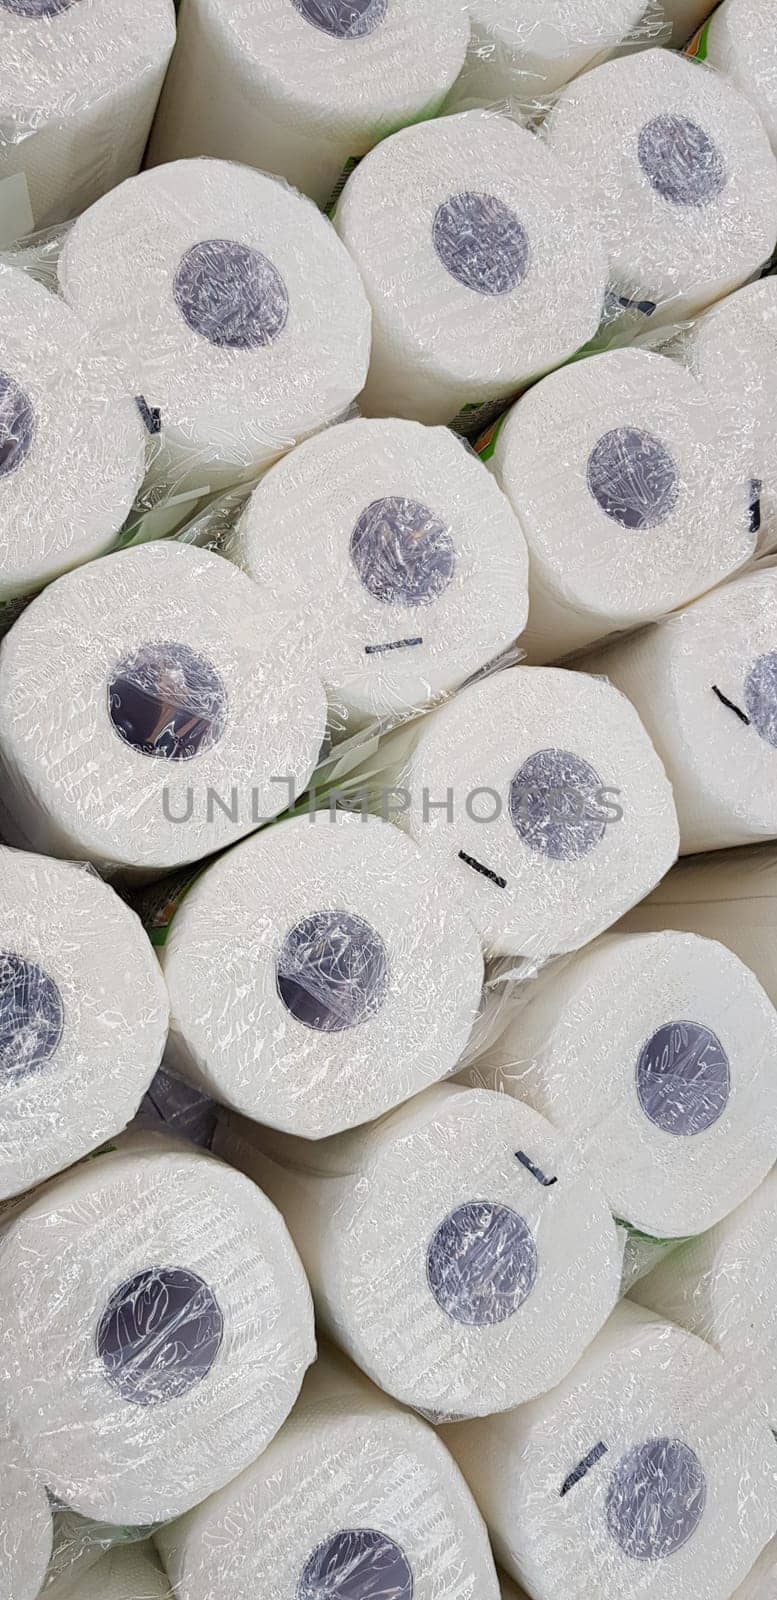 top view of lots of toilet paper rolls. soft hygienic paper. close up by antoksena